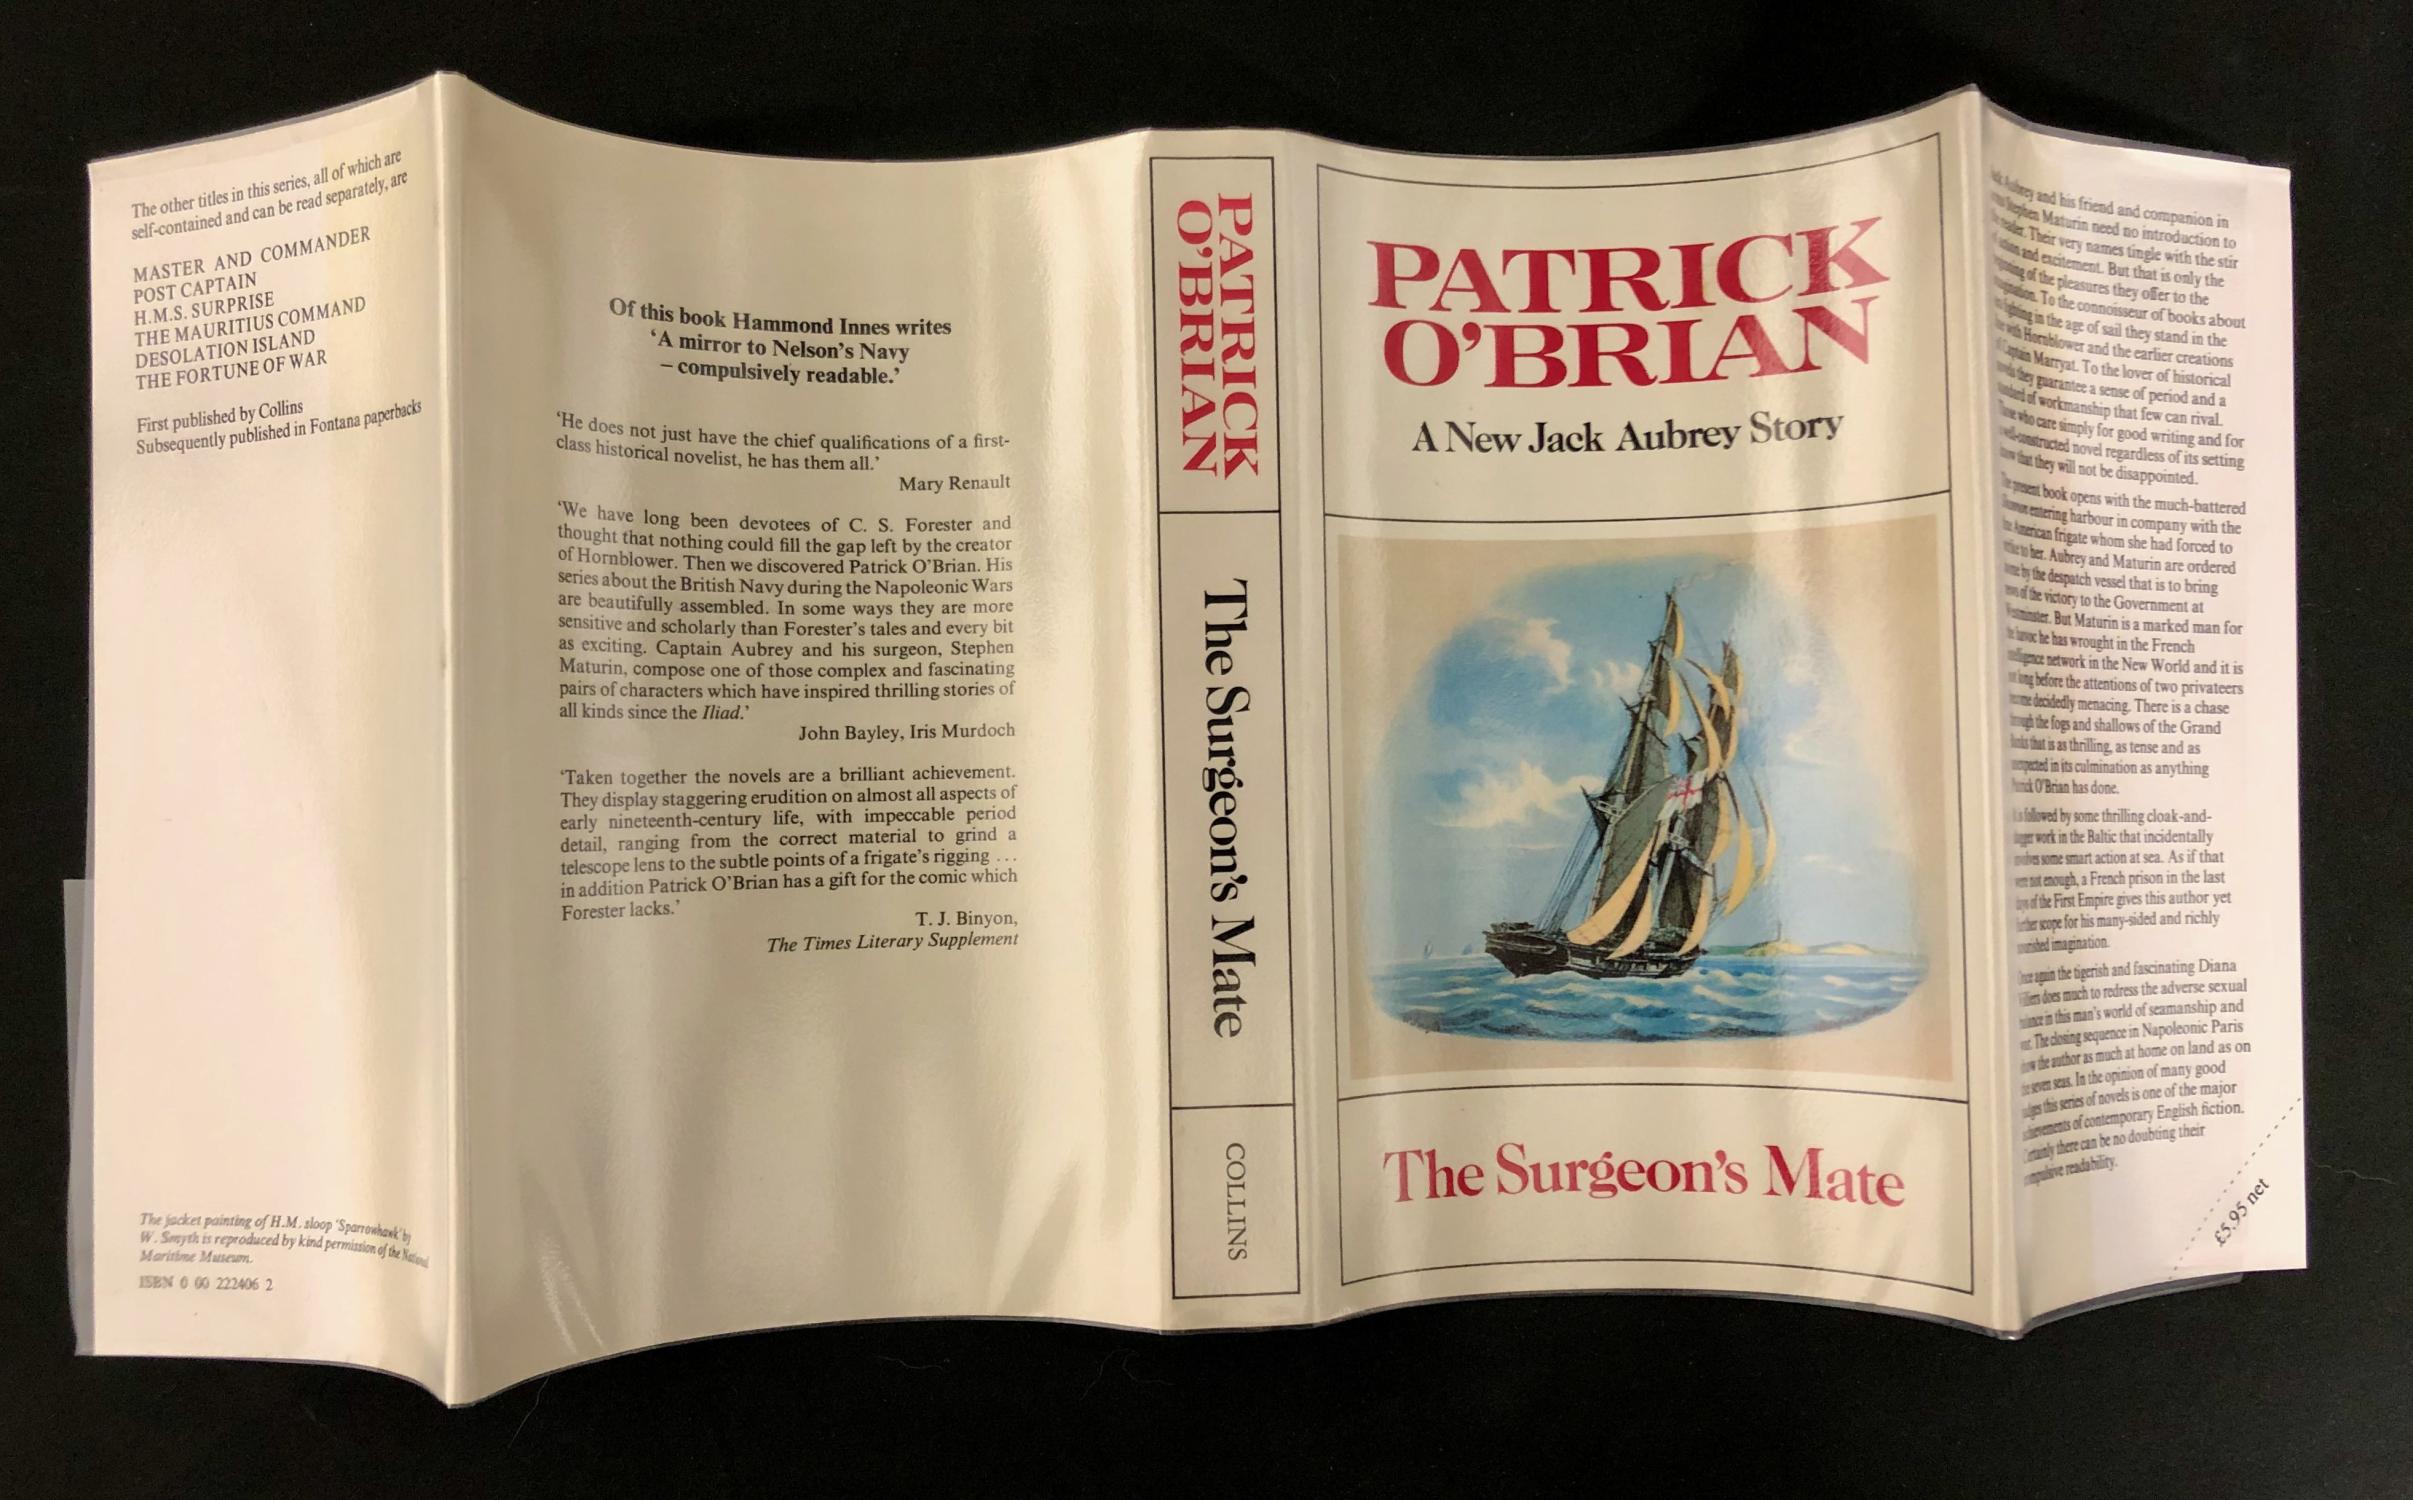 The Complete Aubrey/Maturin Novels by Patrick O